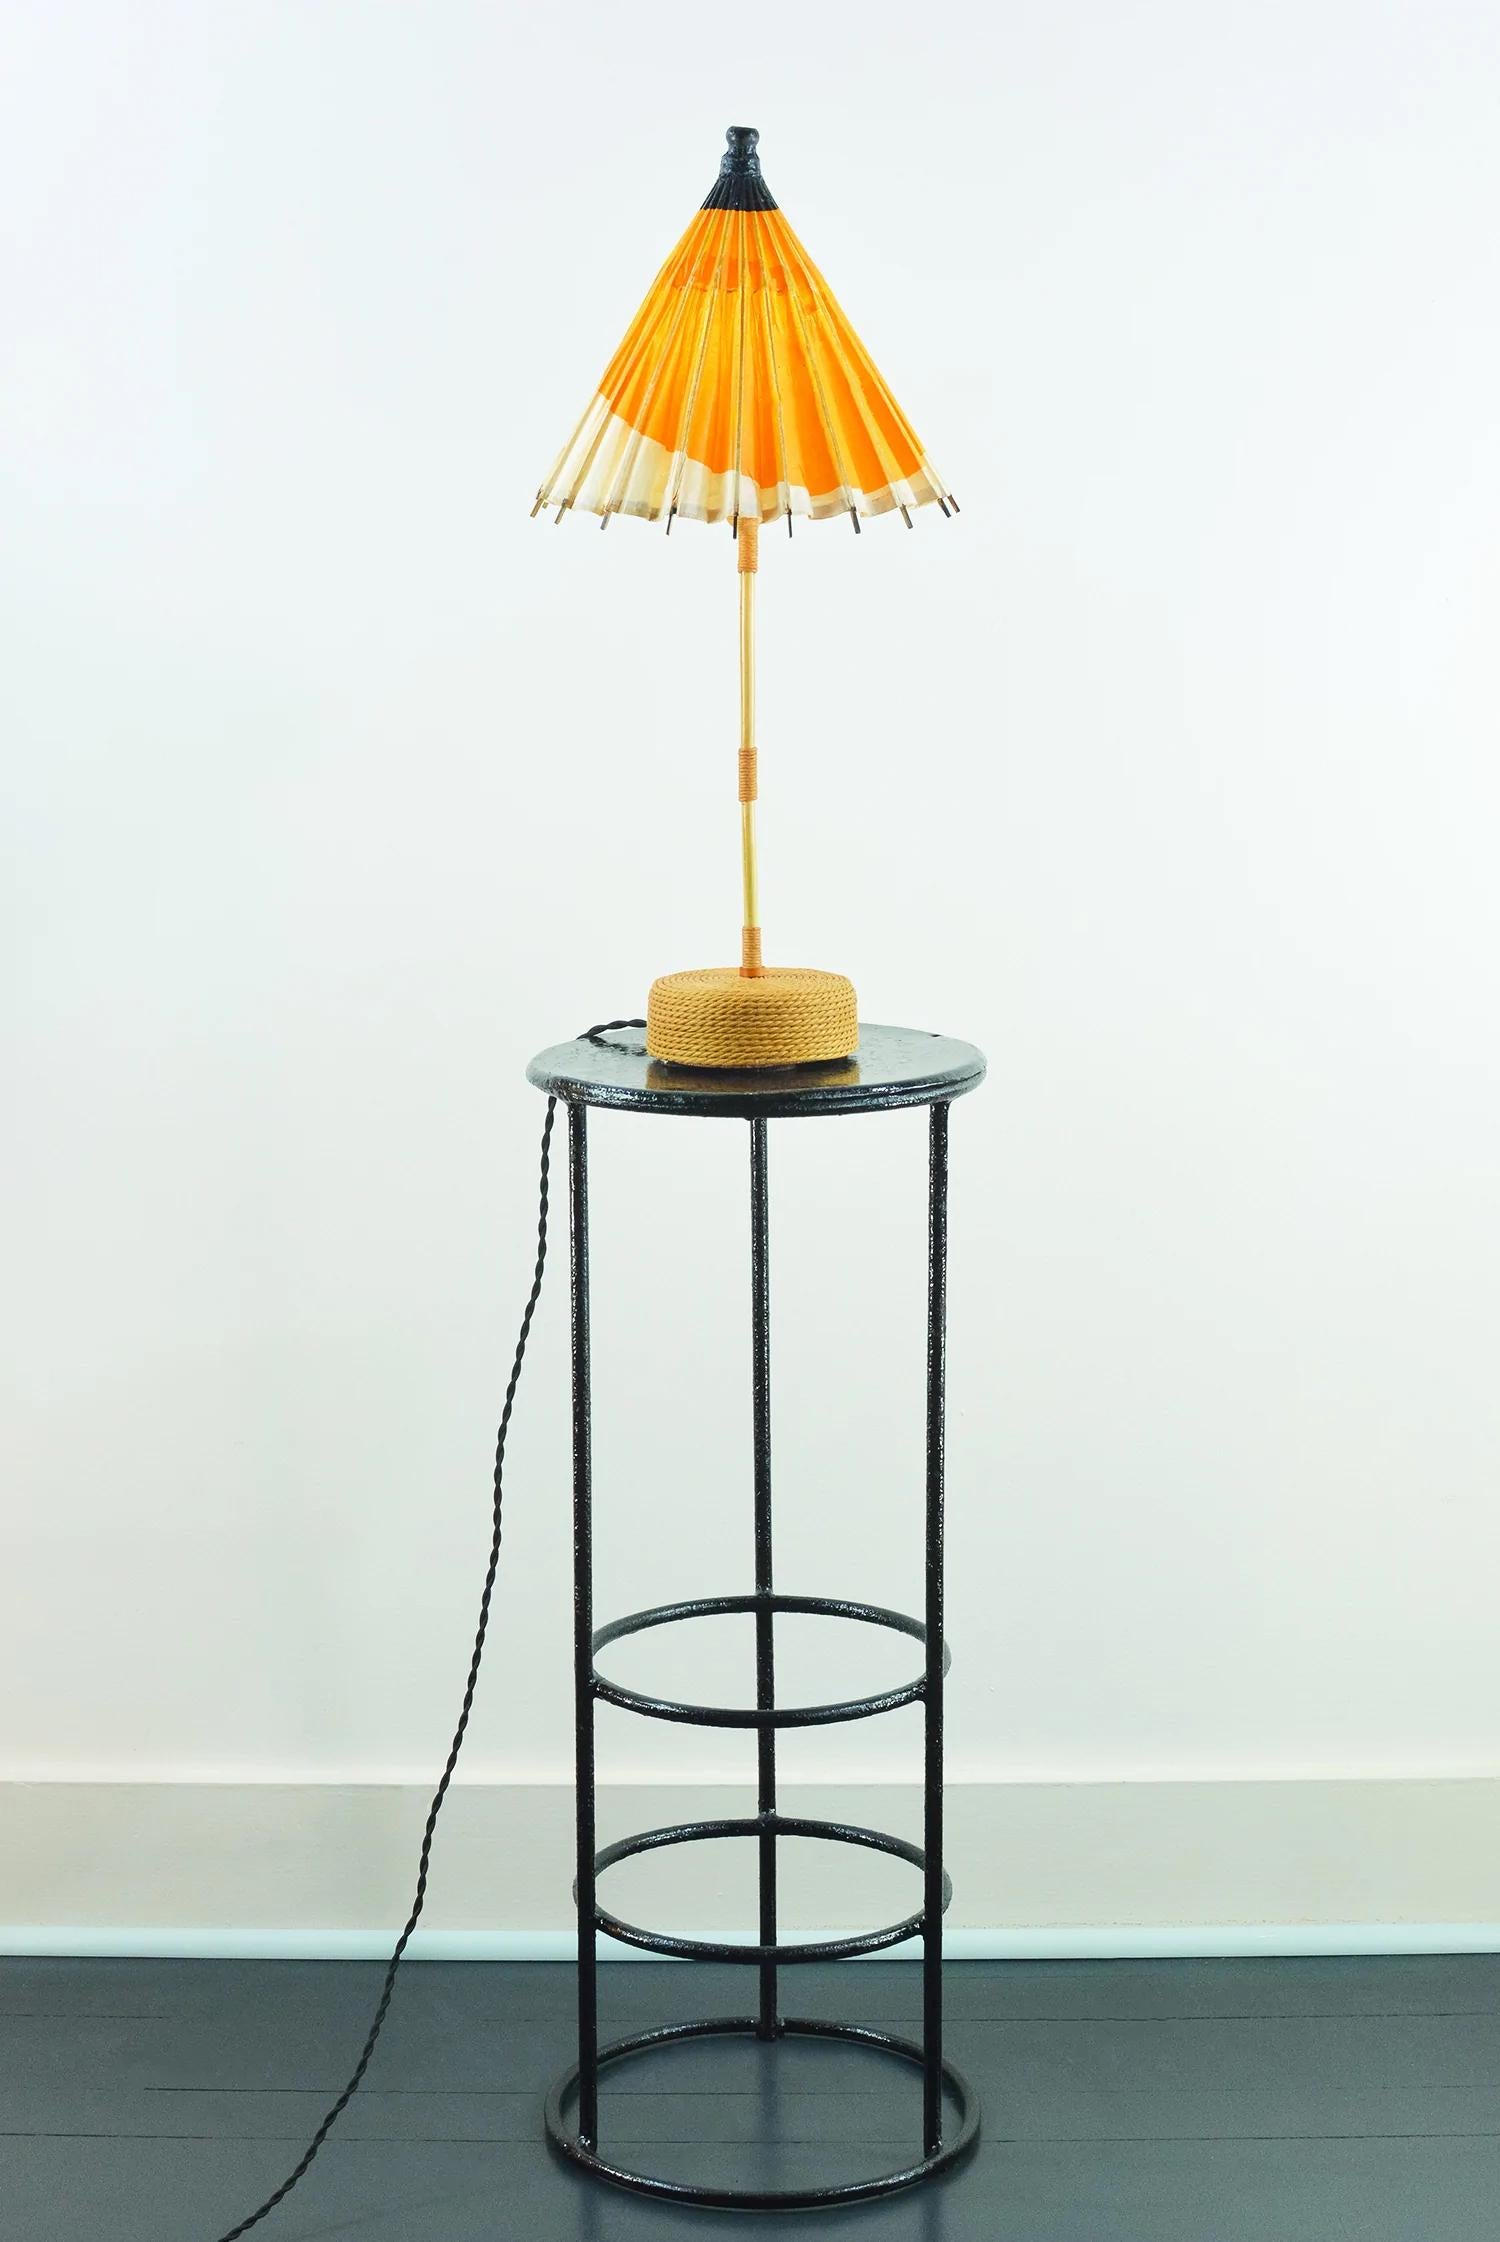 Art Deco 'World's Fair' Bamboo Cocktail Lamp with Parasol Shade by Christopher Tennant